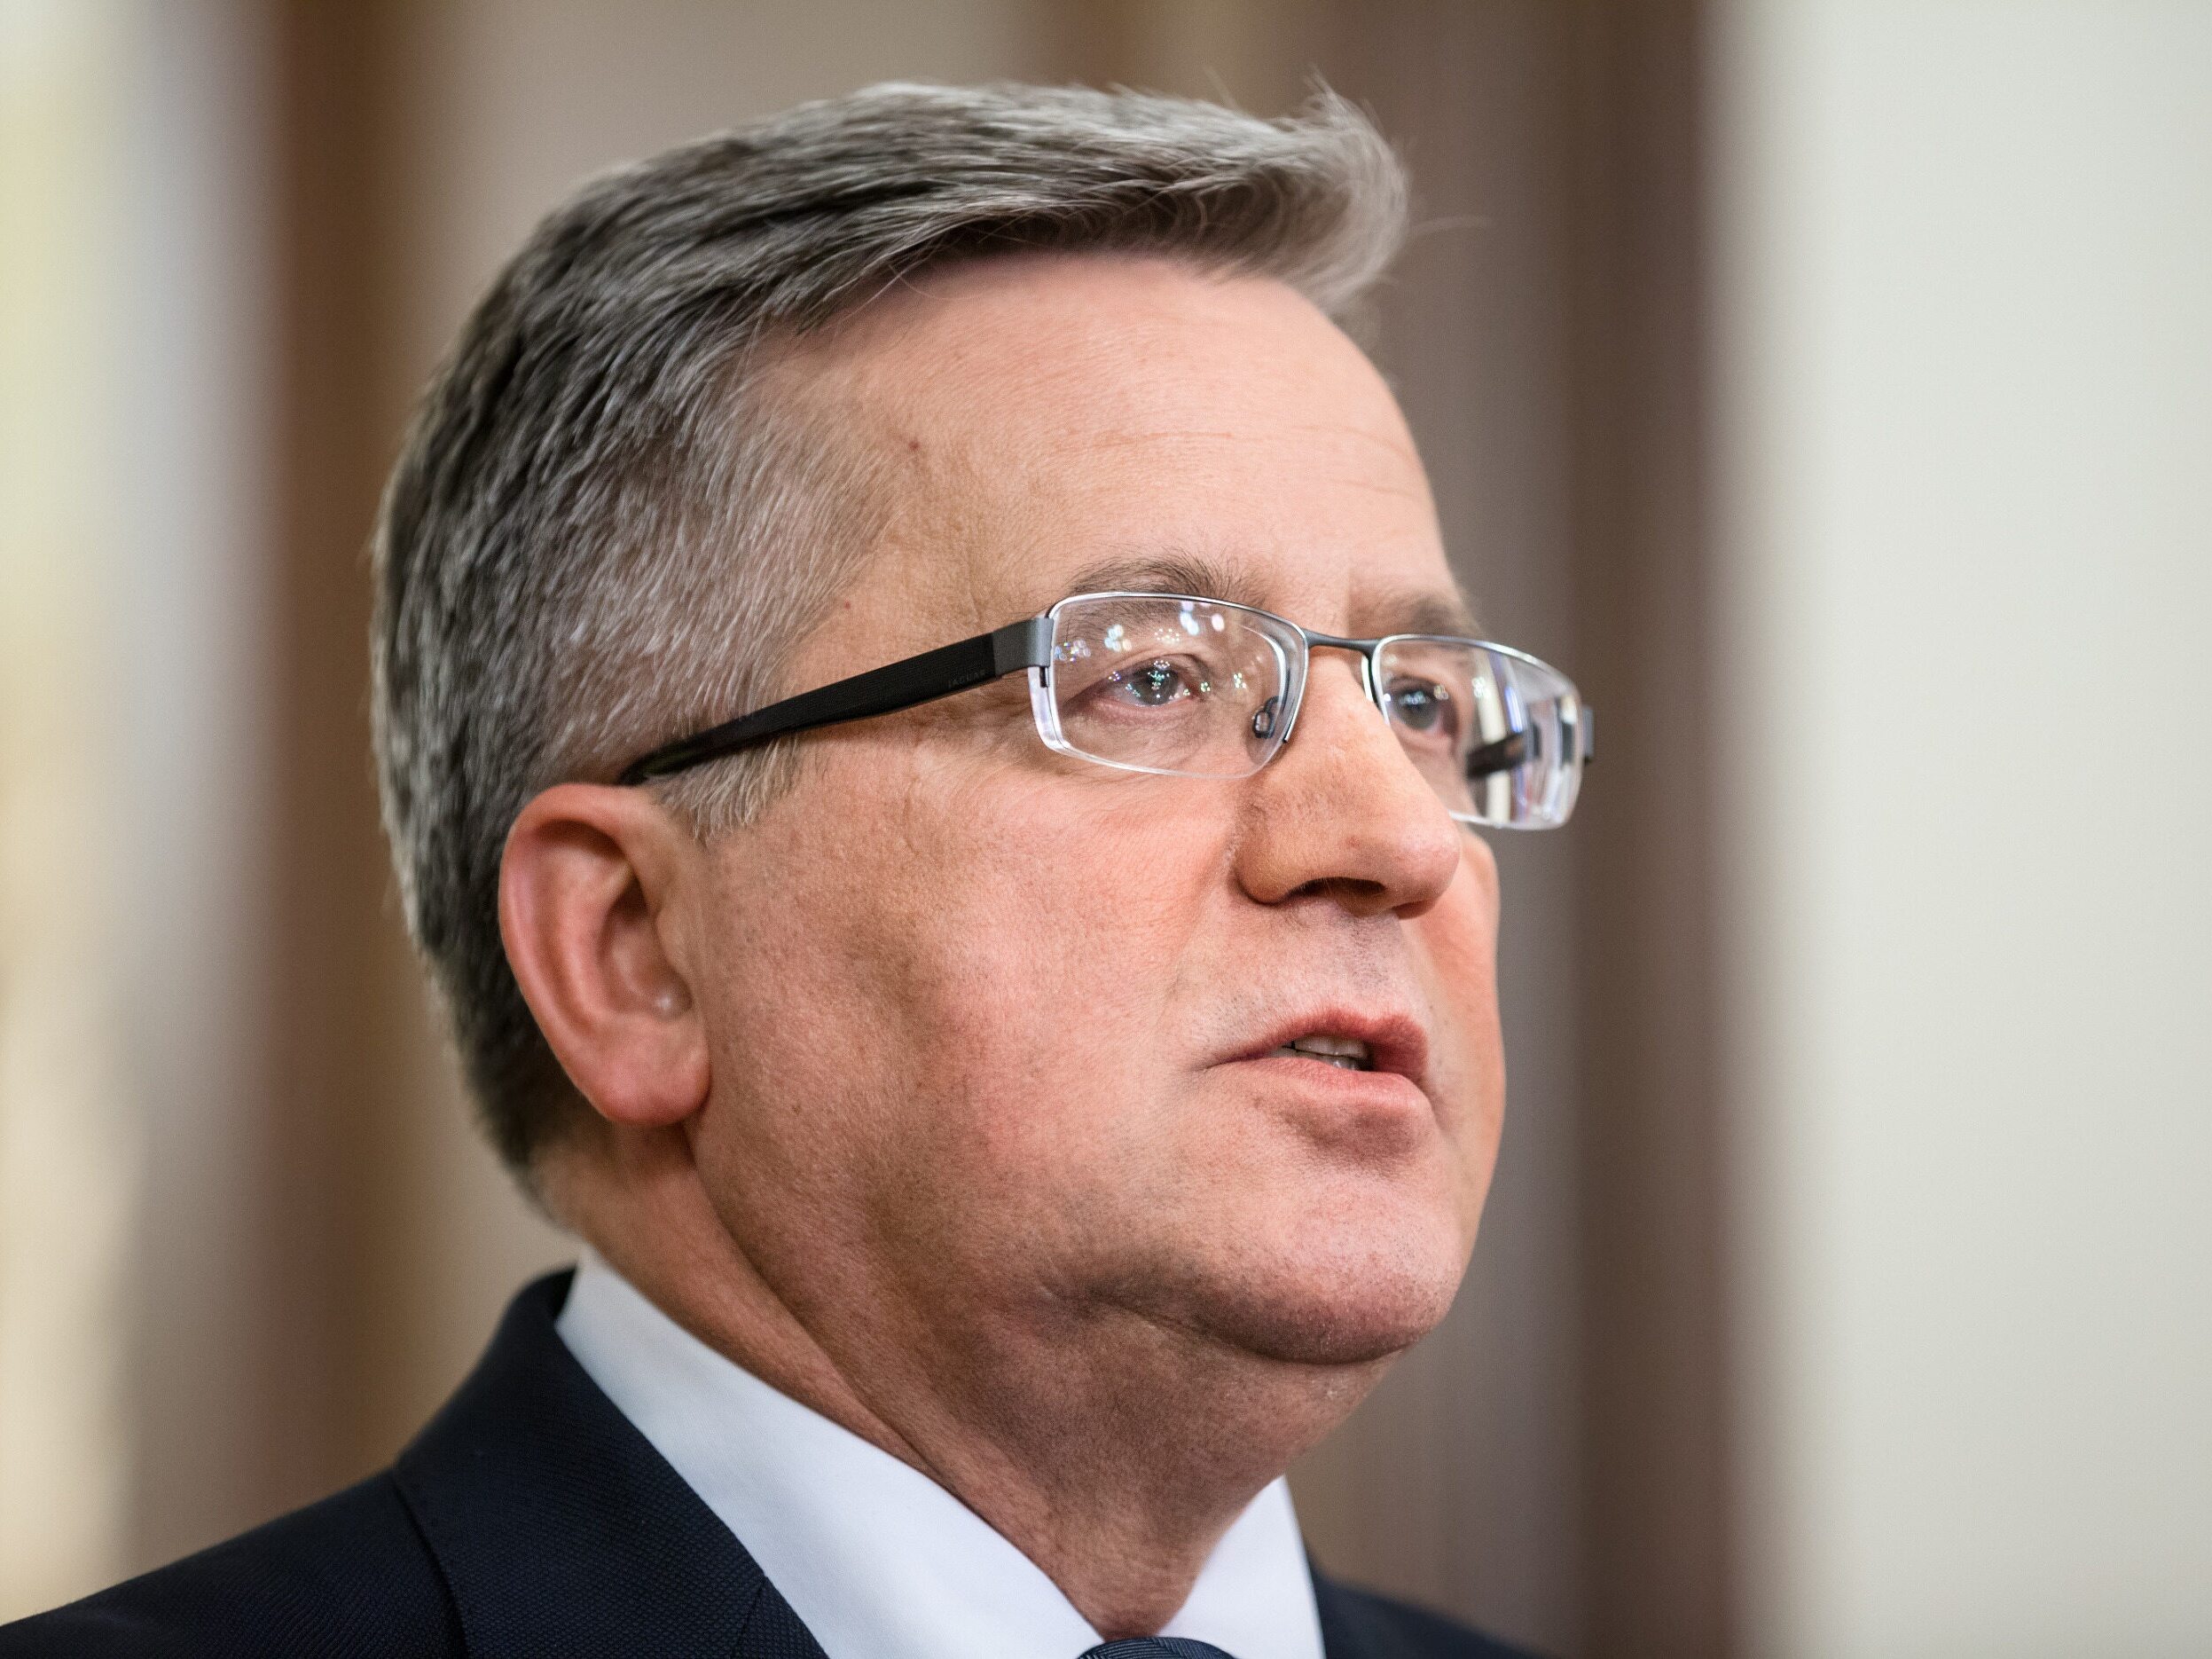 Komorowski about "ministers": Let them say what they want.  I will speak in accordance with the constitution